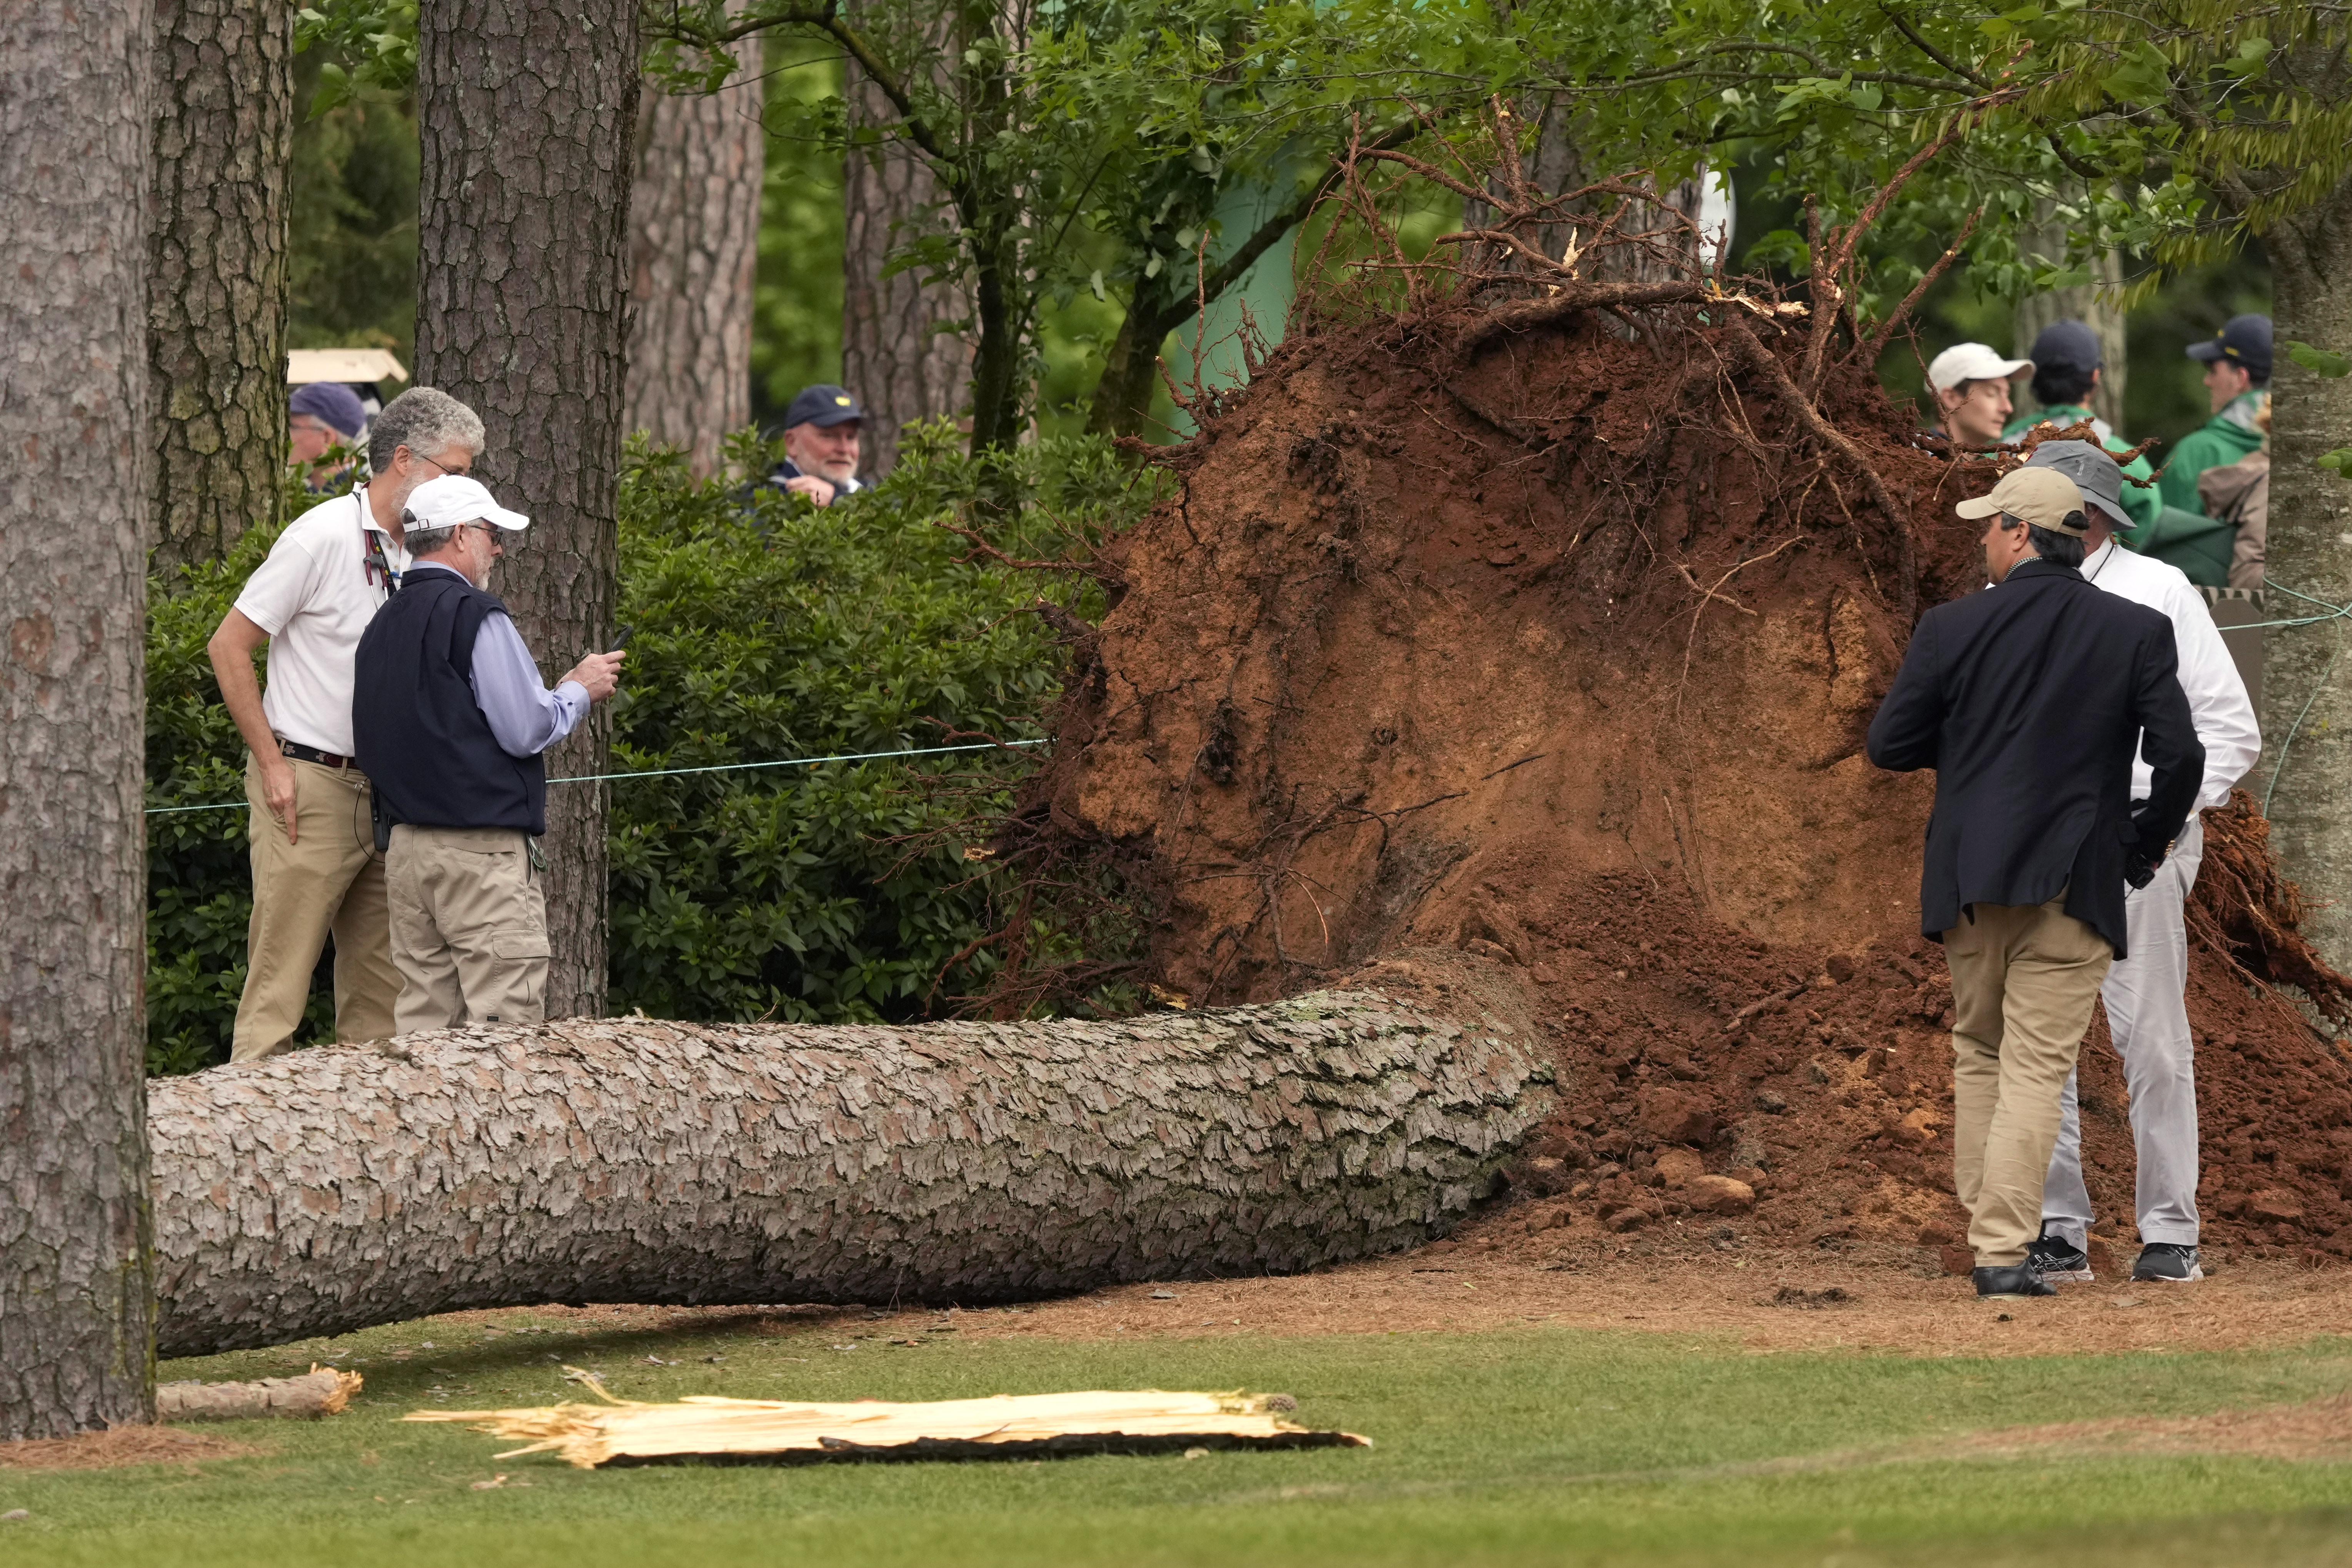 Volunteers and staff secure the area around where a tree fell near the 17th tee during the second round of The Masters golf tournament.